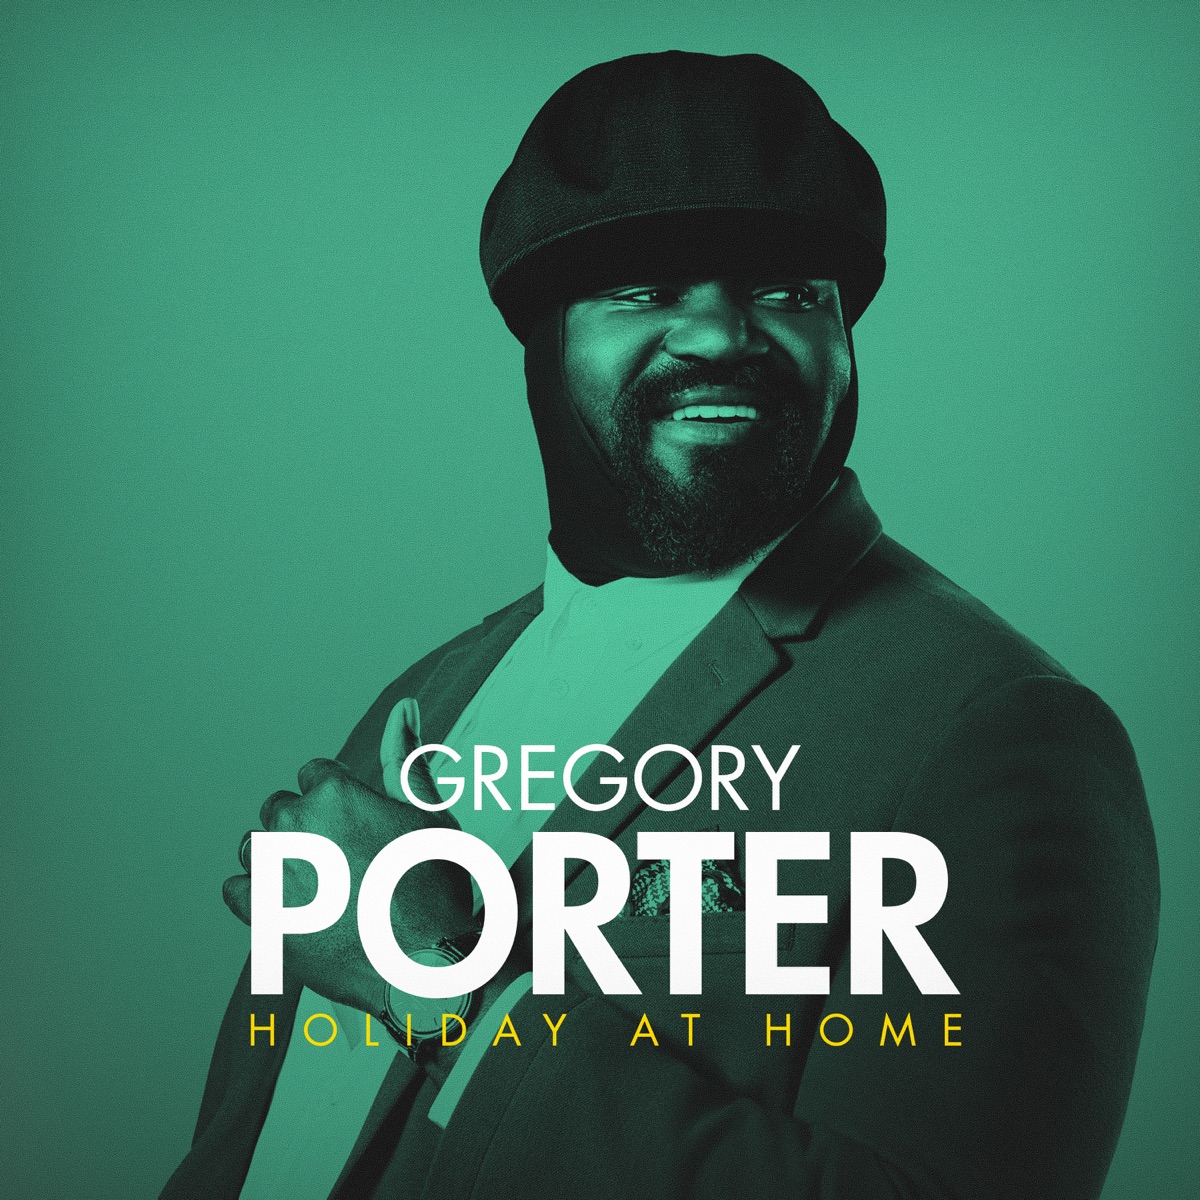 Take Me to the Alley by Gregory Porter on Apple Music